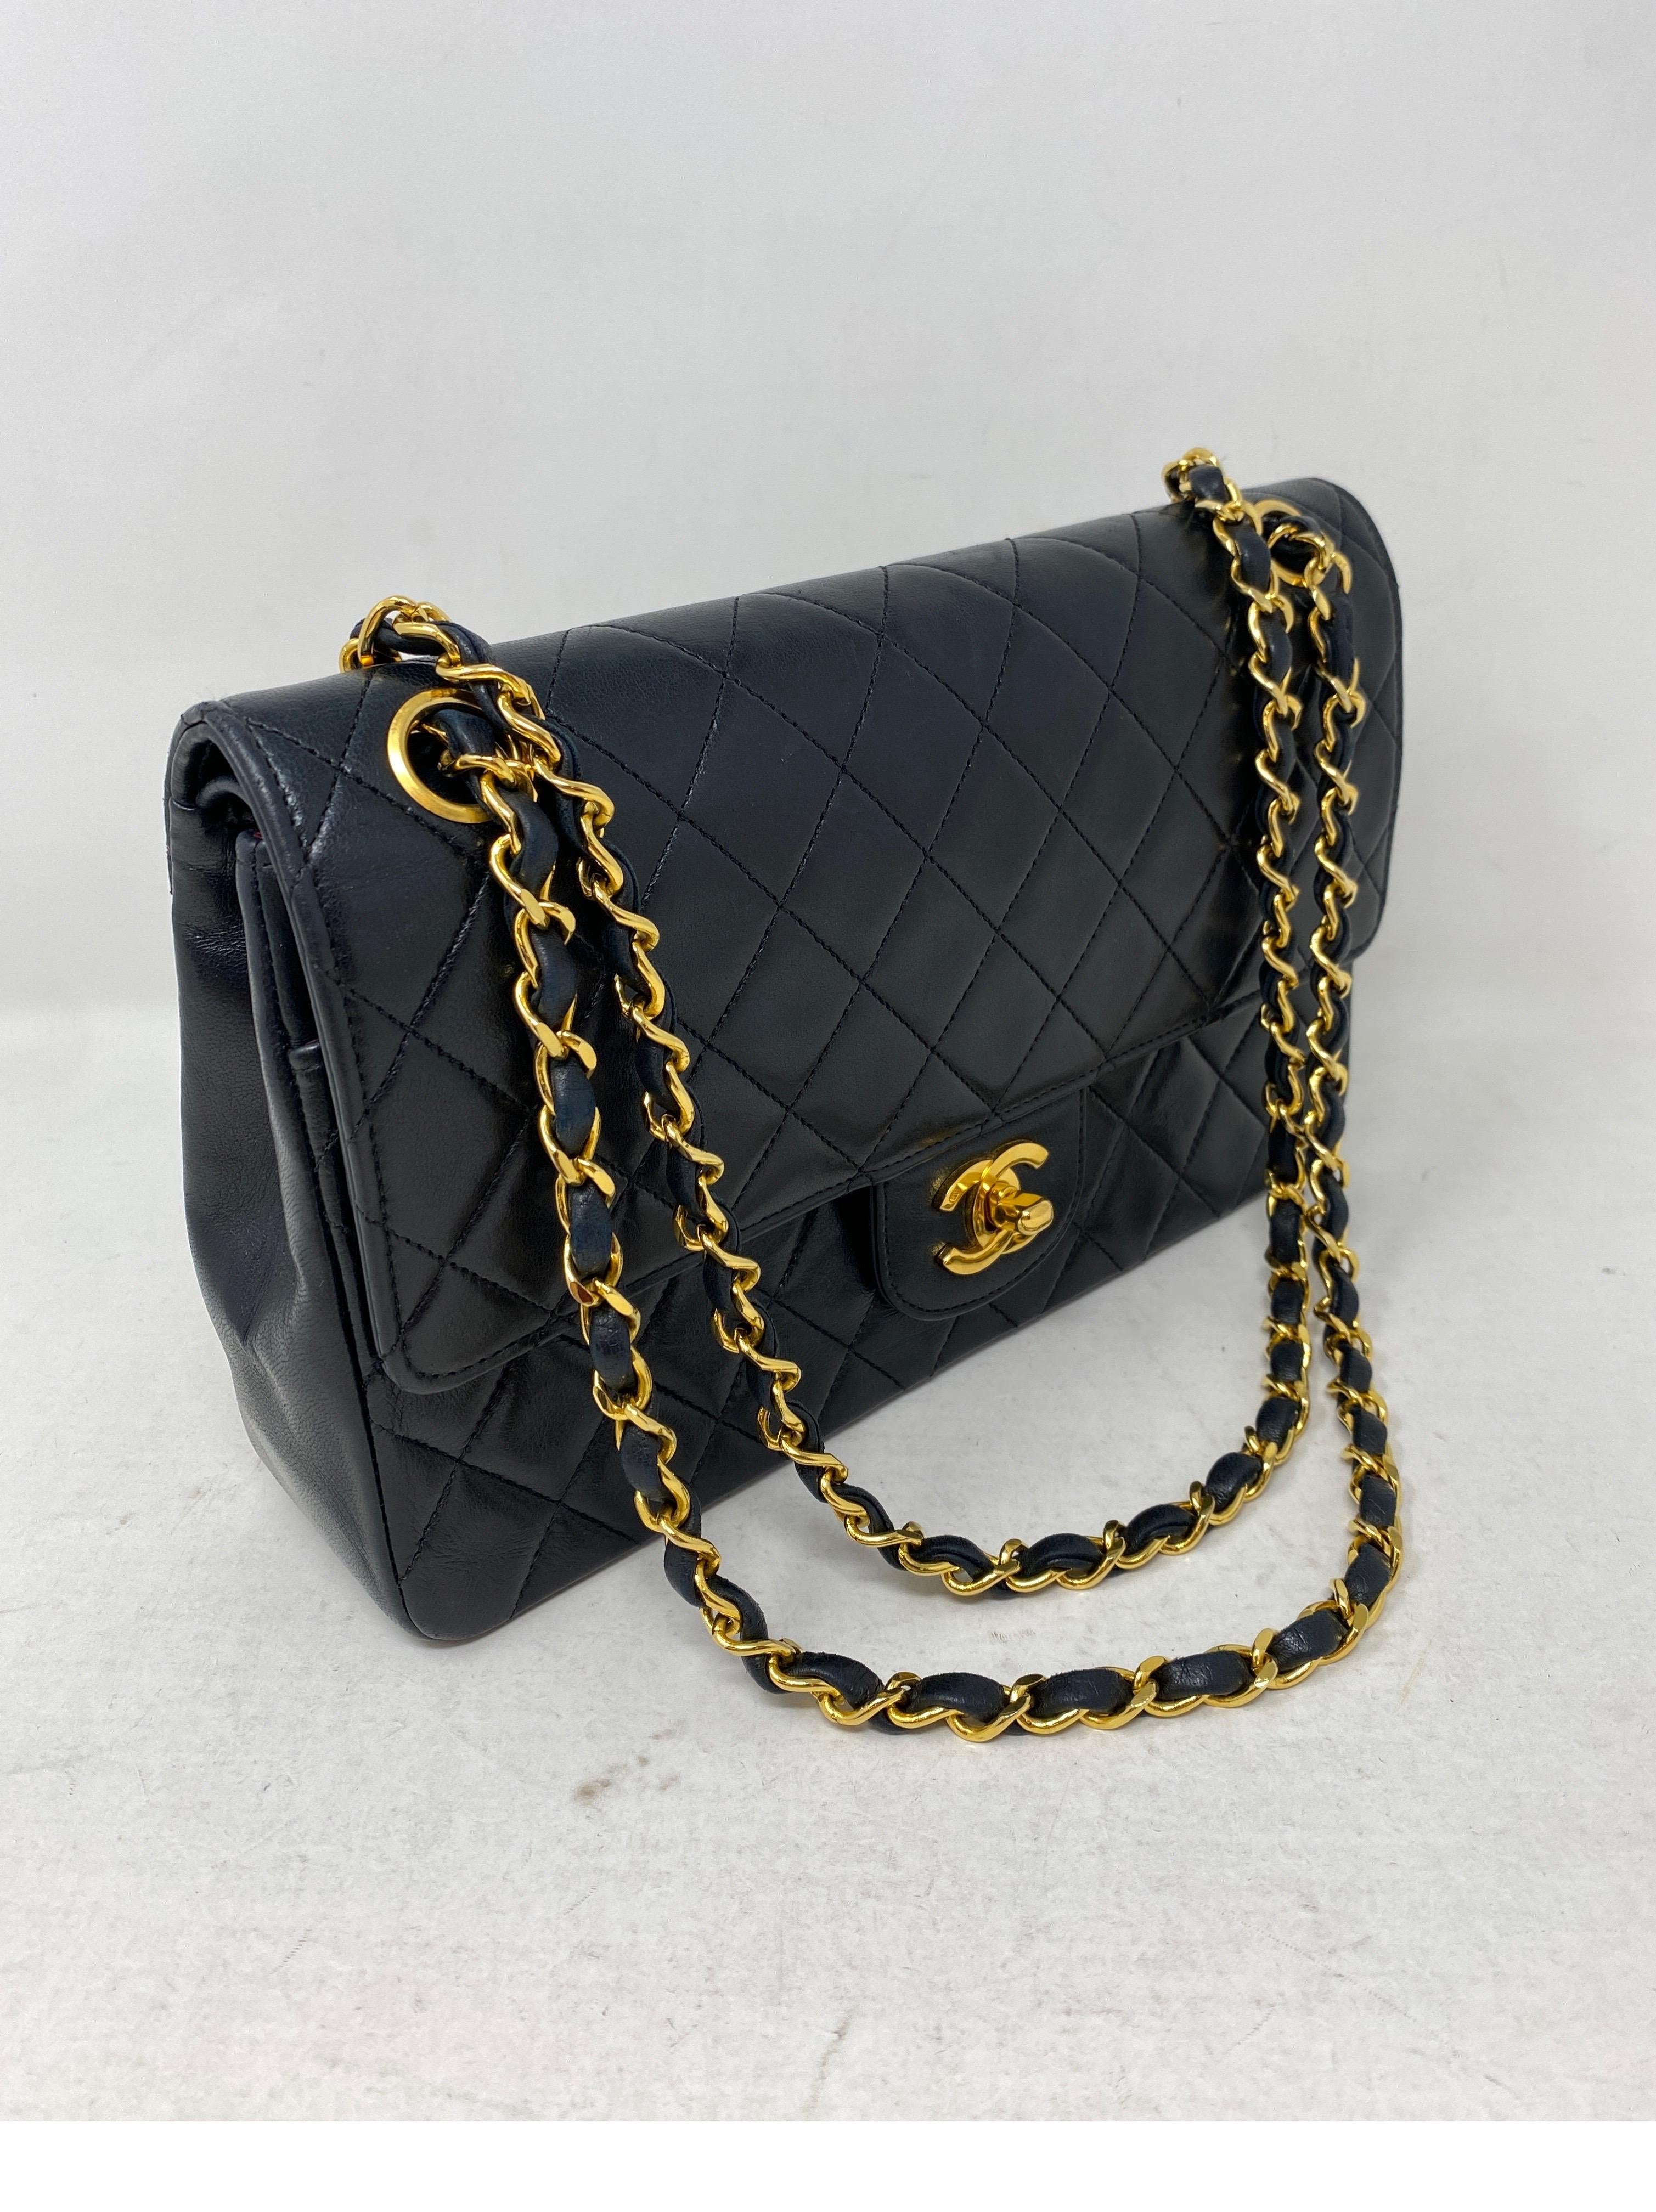 Chanel Medium Double Flap Bag. Black lambskin leather bag. Gold hardware. Vintage Chanel Bag. 24 kt gold plated hardware. Light indentions on leather. Side pocket has light wear and rubbing from age. Beautiful bag overall. Classic 10